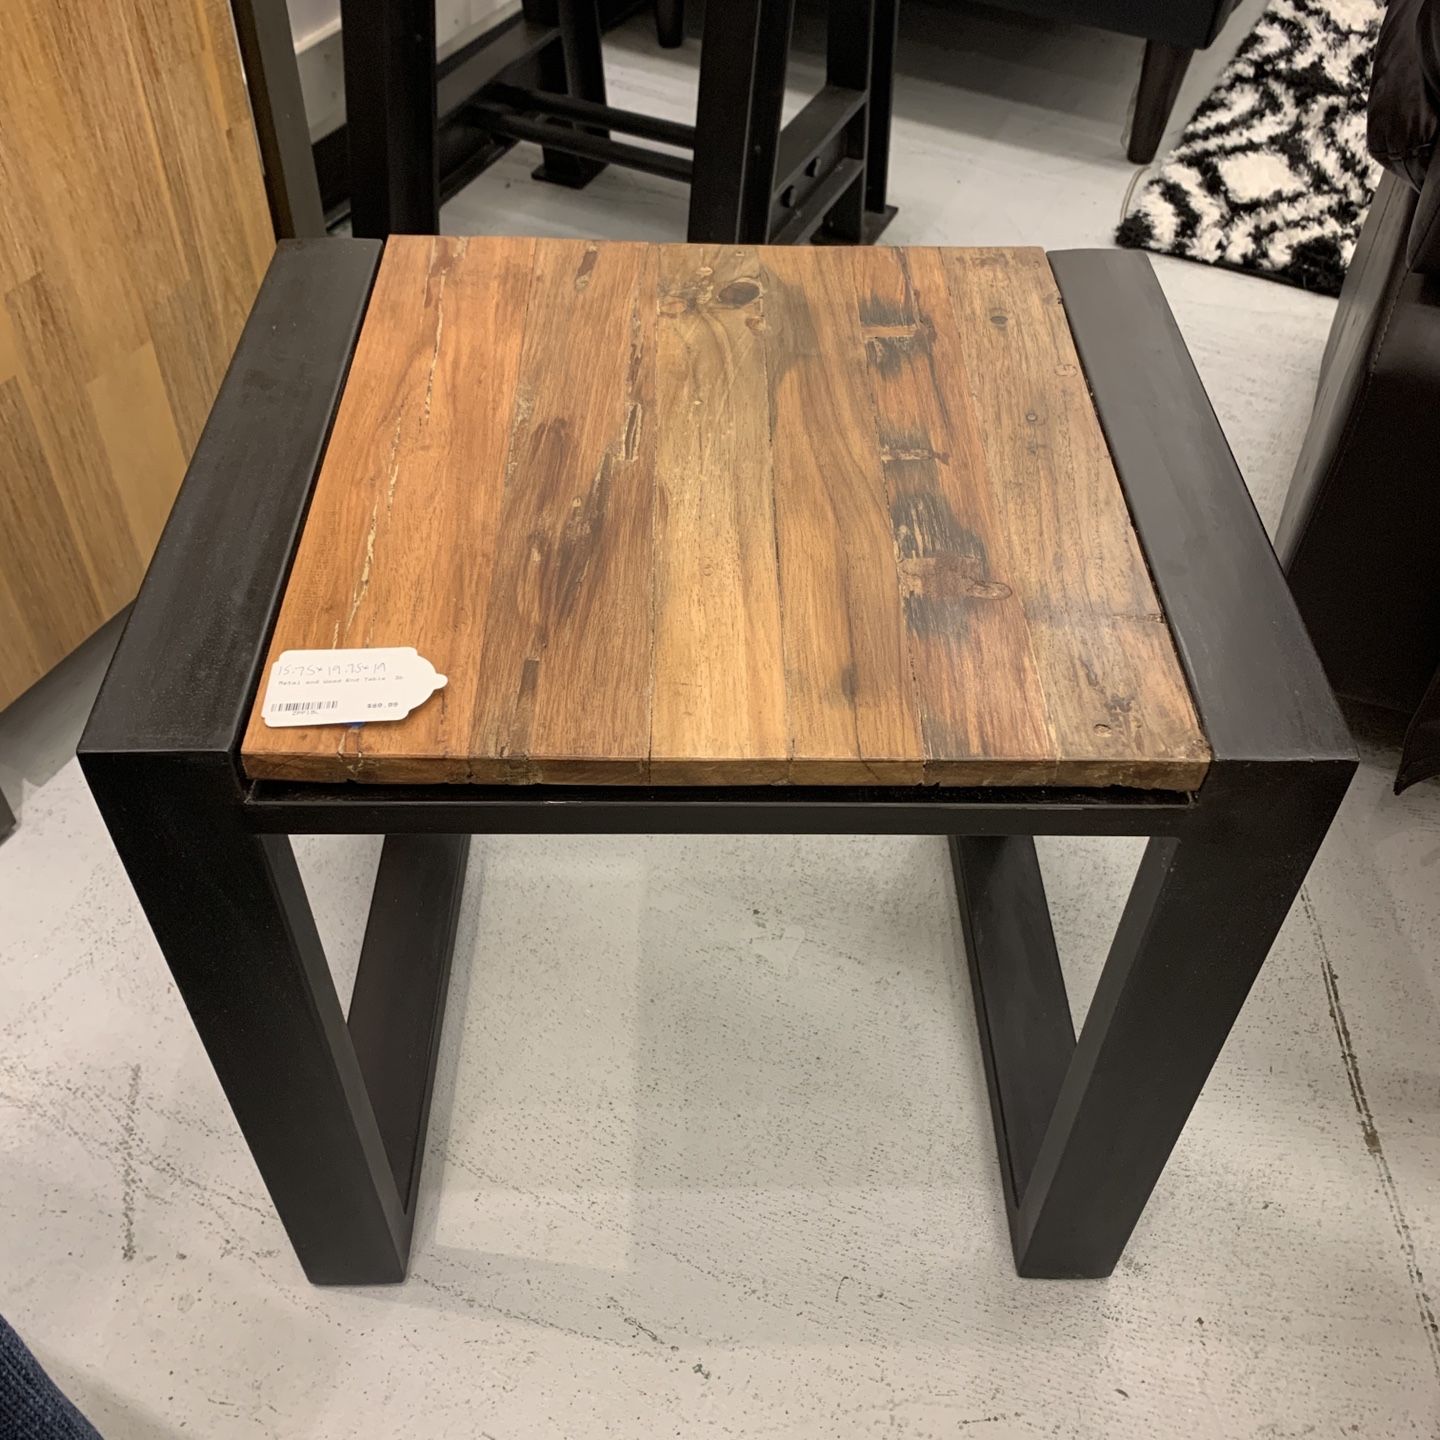 Metal and Wood End Table